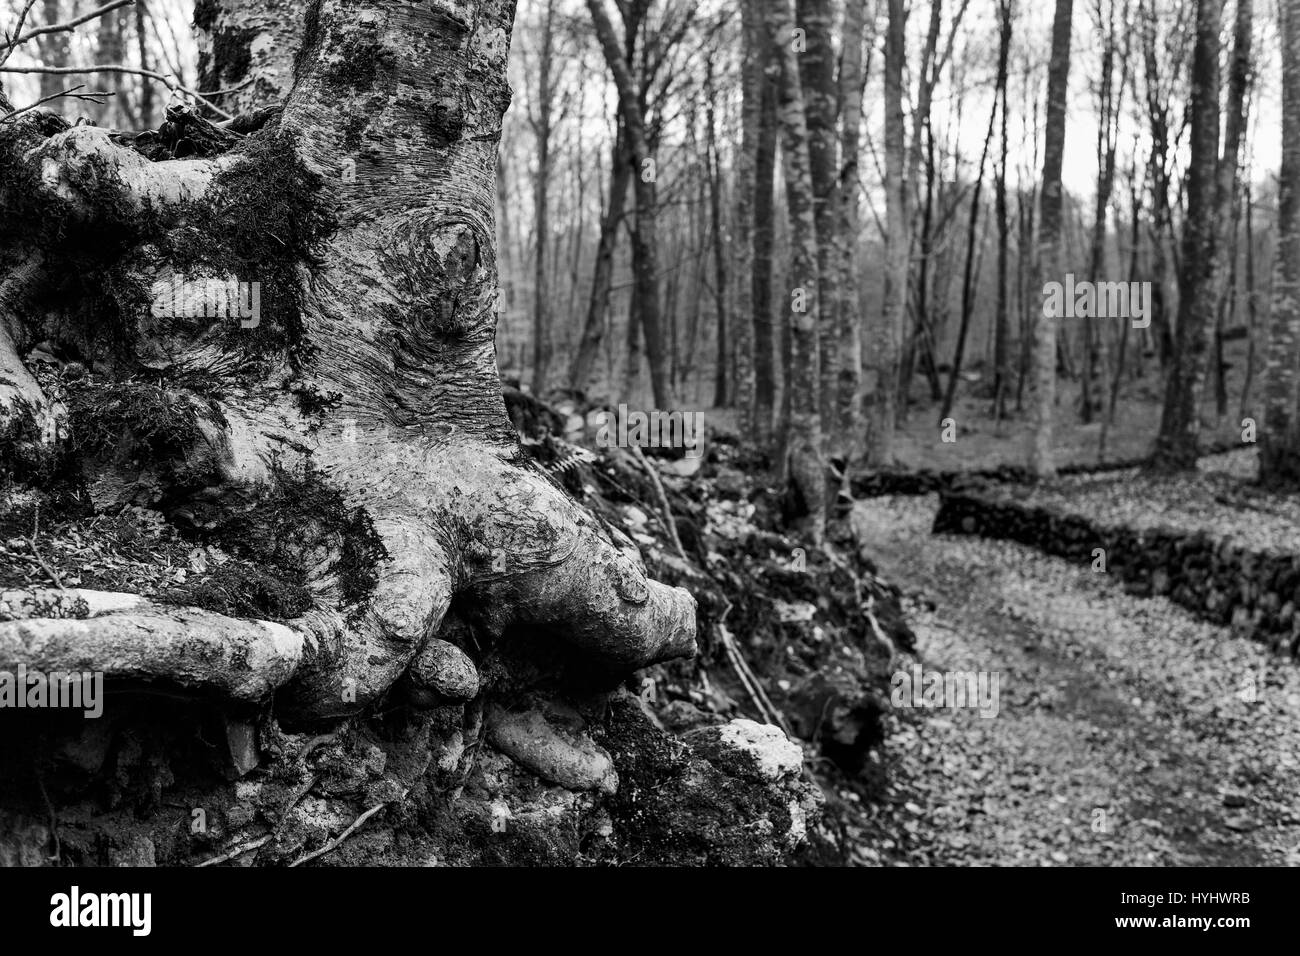 a view of La Fageda de en Jorda, a forest of beech trees, in the Garrotxa Volcanic Zone Natural Park, in Olot, Spain, in black and white Stock Photo